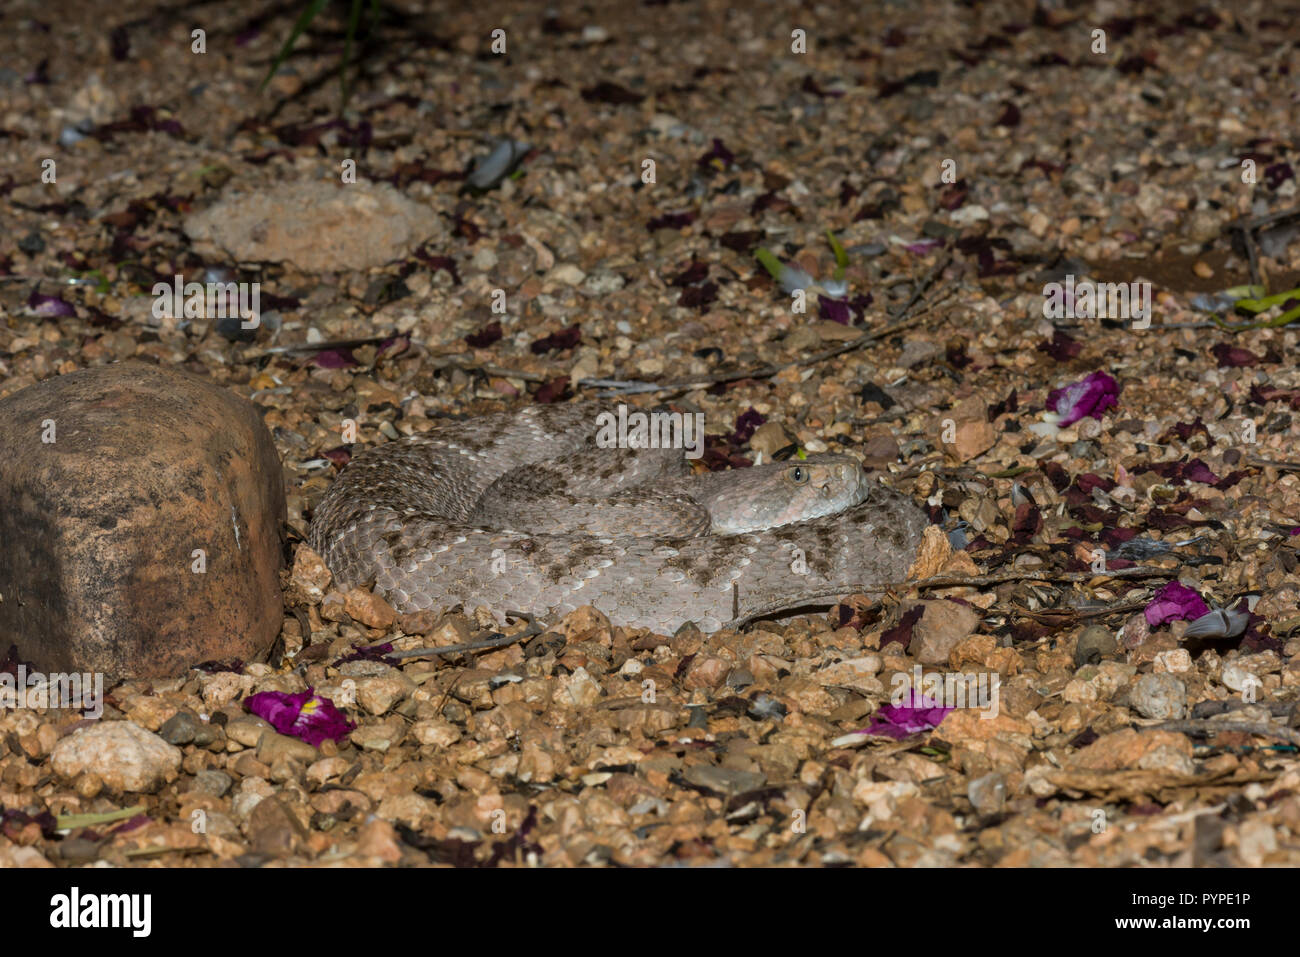 A Western Diamondback rattlesnake (Crotalus atrox) lays in wait at night, hunting for birds or rodents (Arizona) Stock Photo